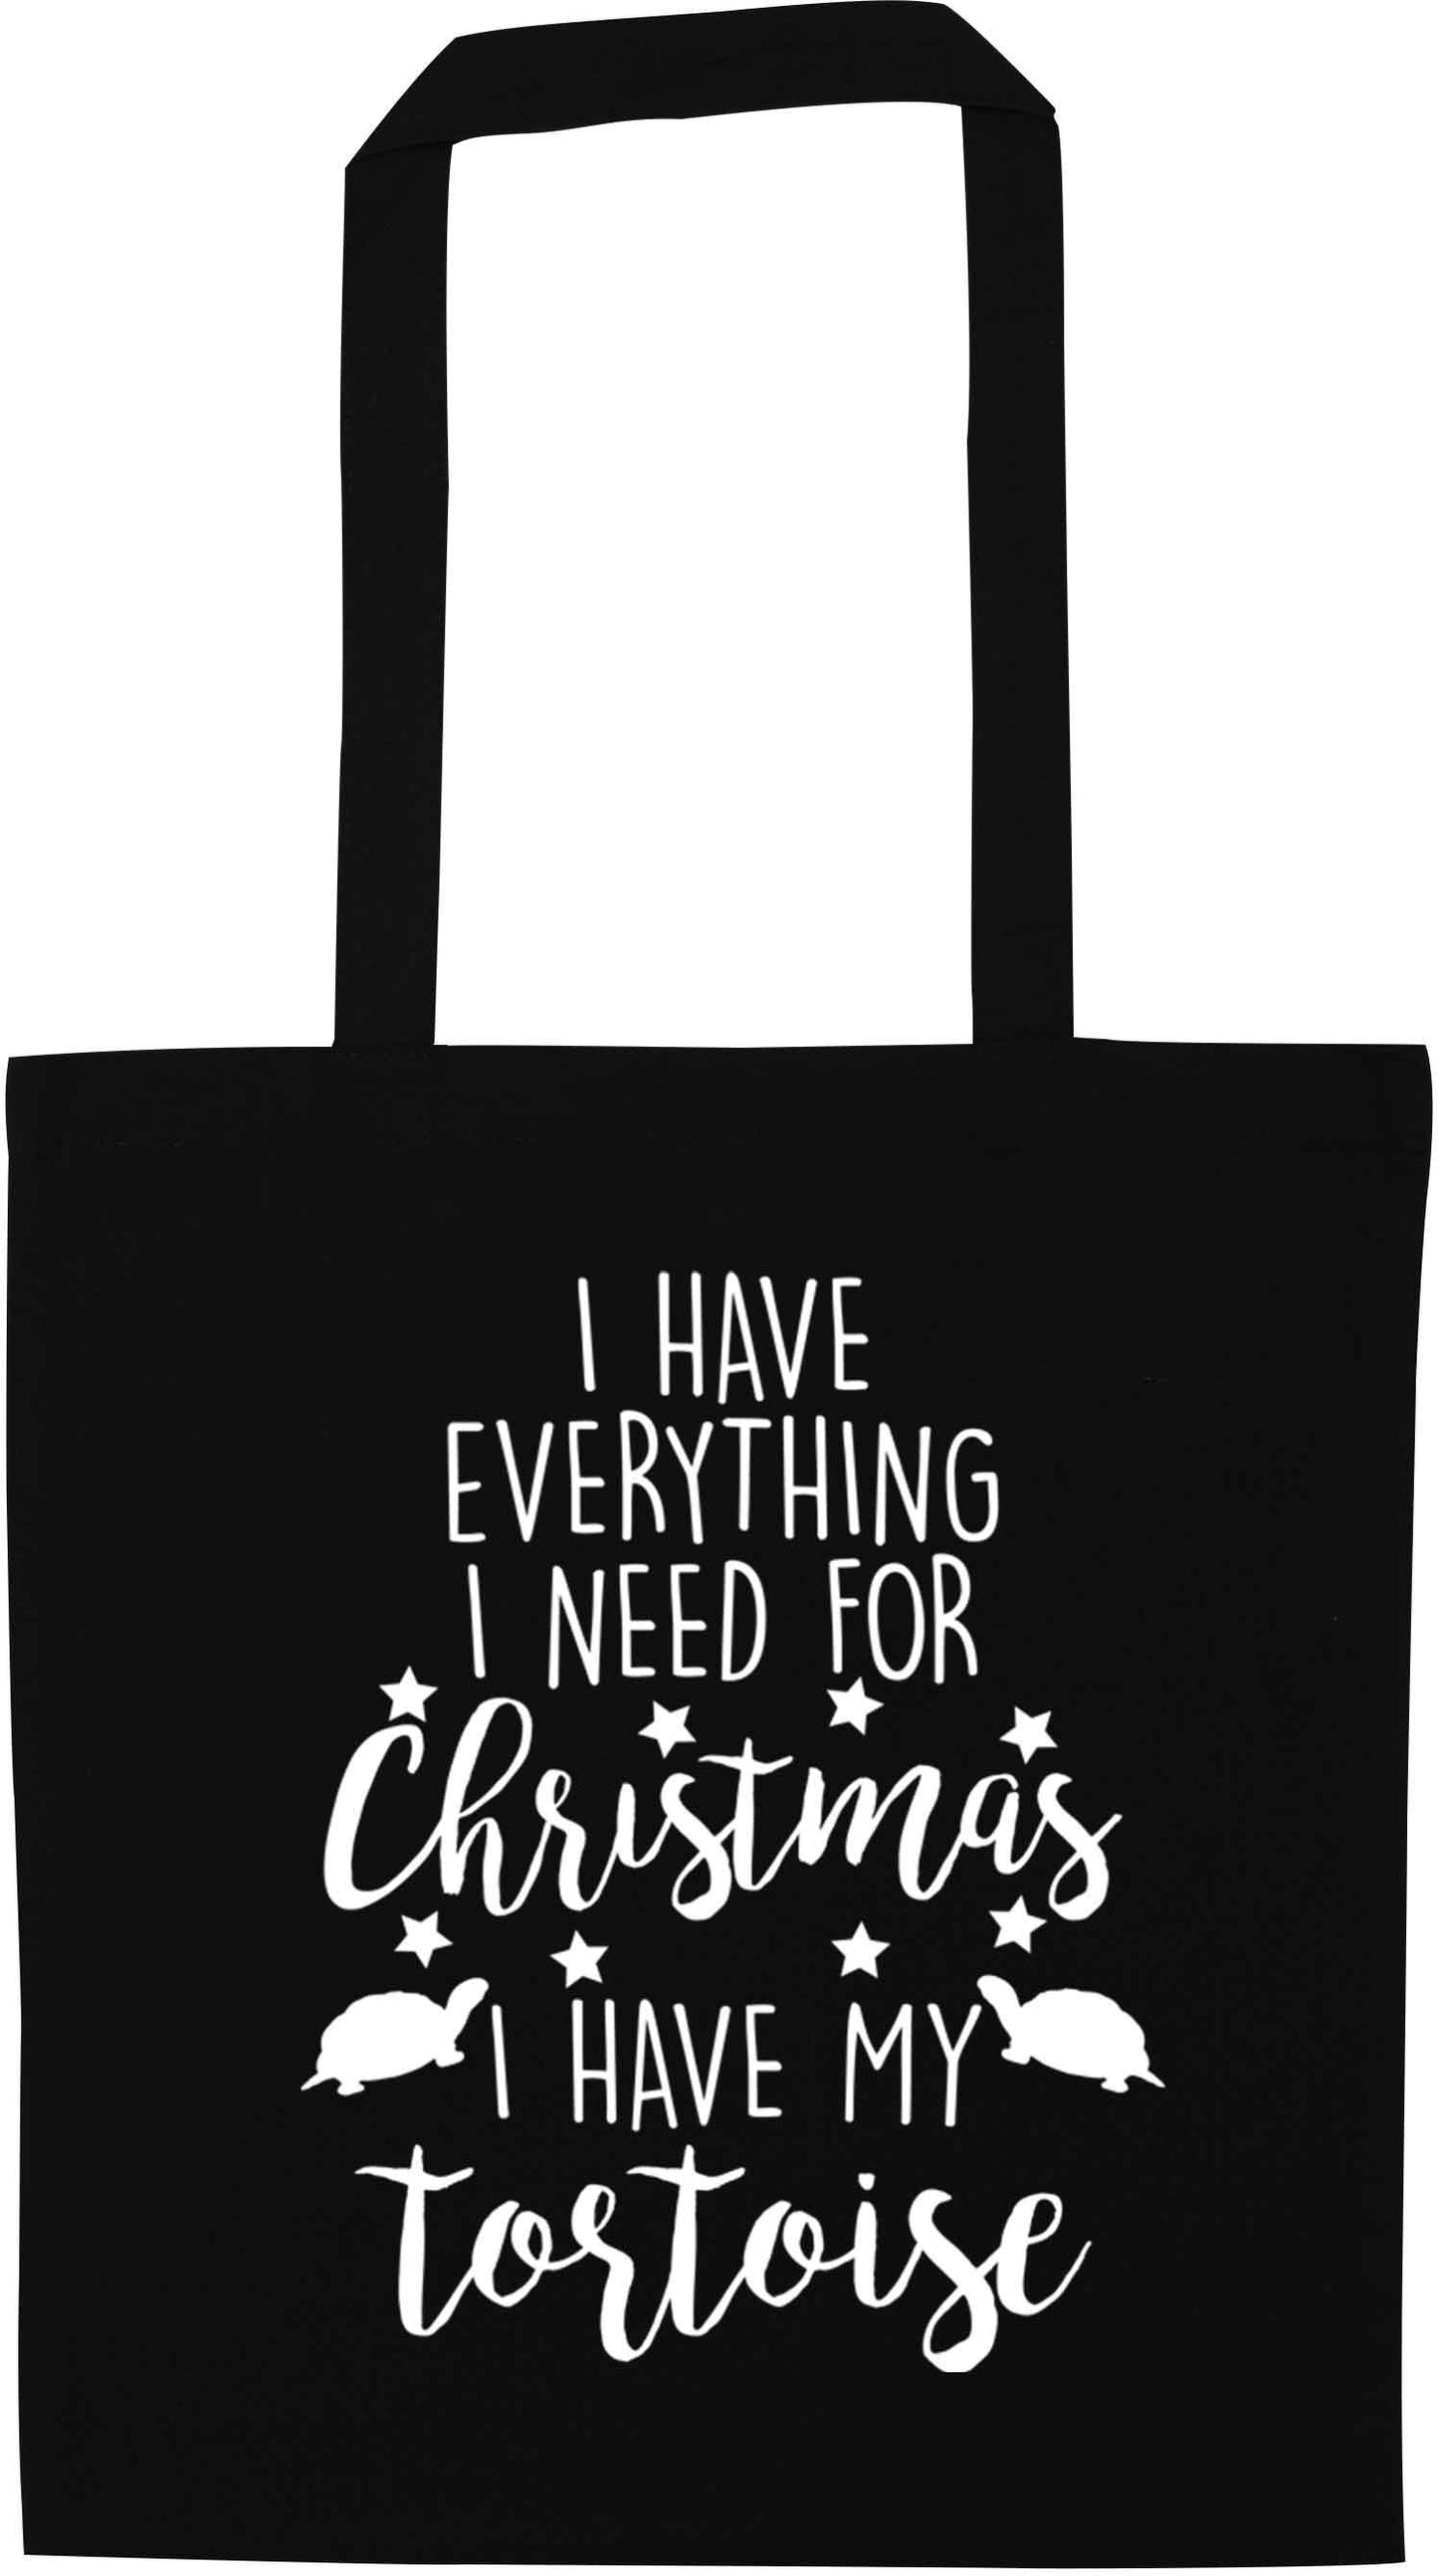 I have everything I need for Christmas I have my tortoise black tote bag